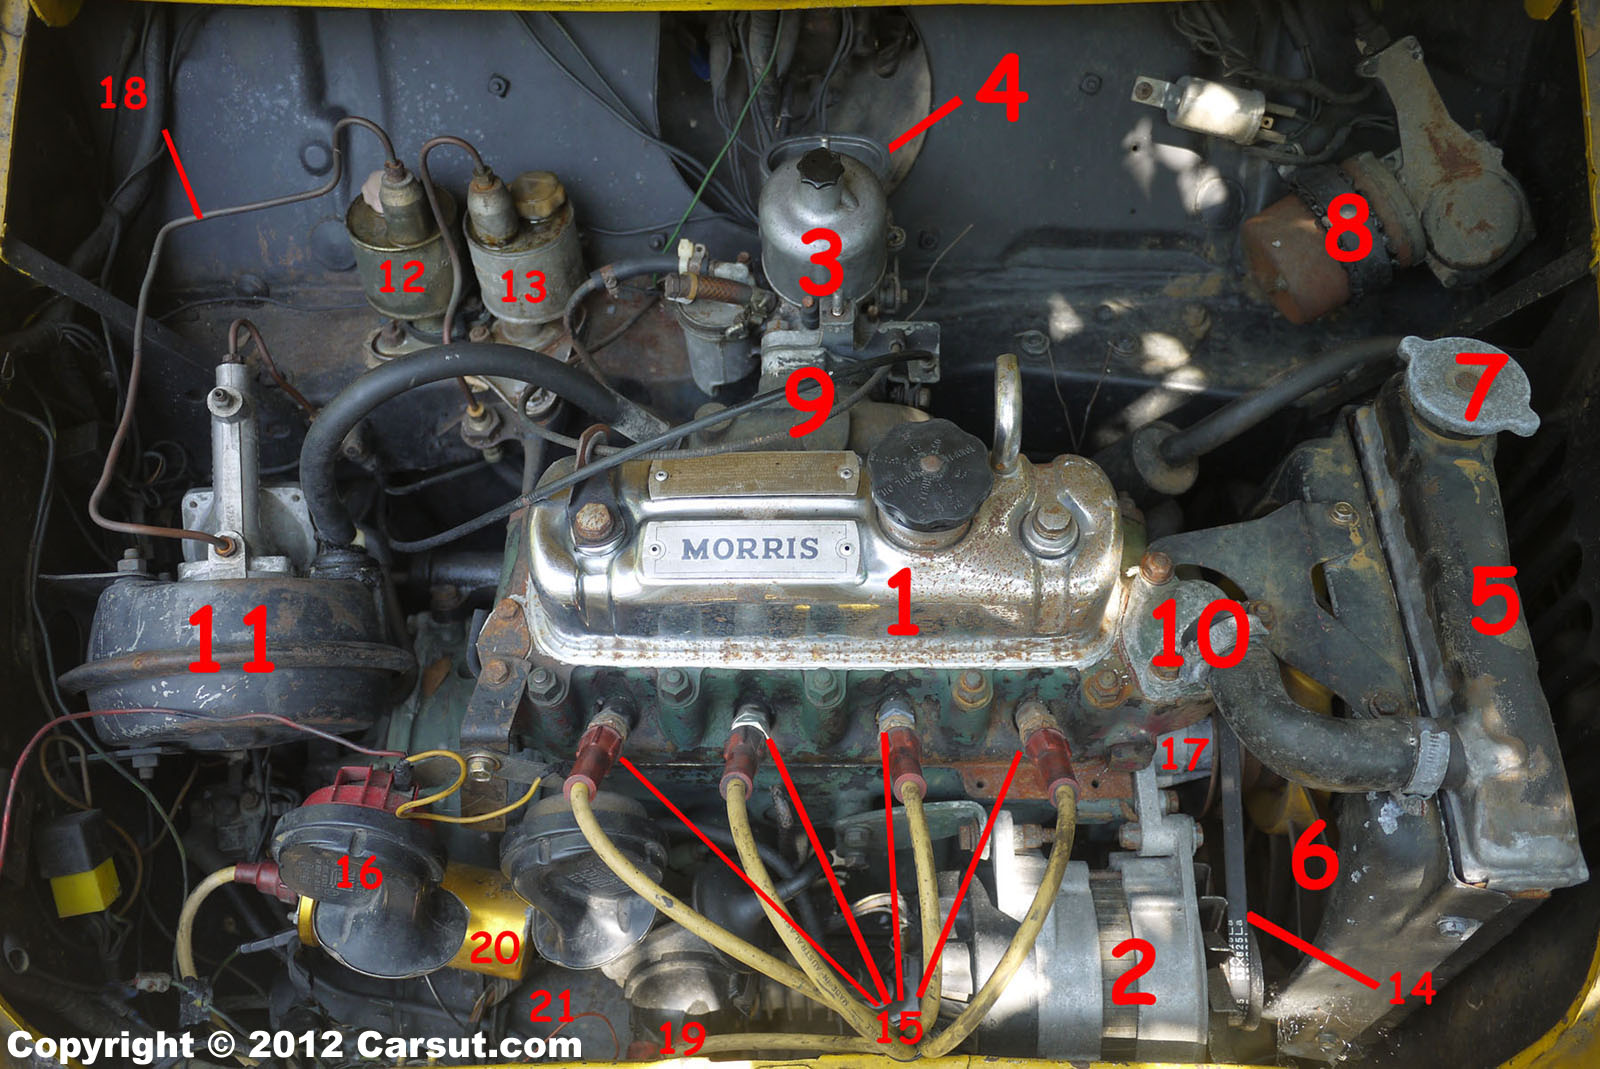 Toyota Car Engine Diagram Another Blog About Wiring Diagram